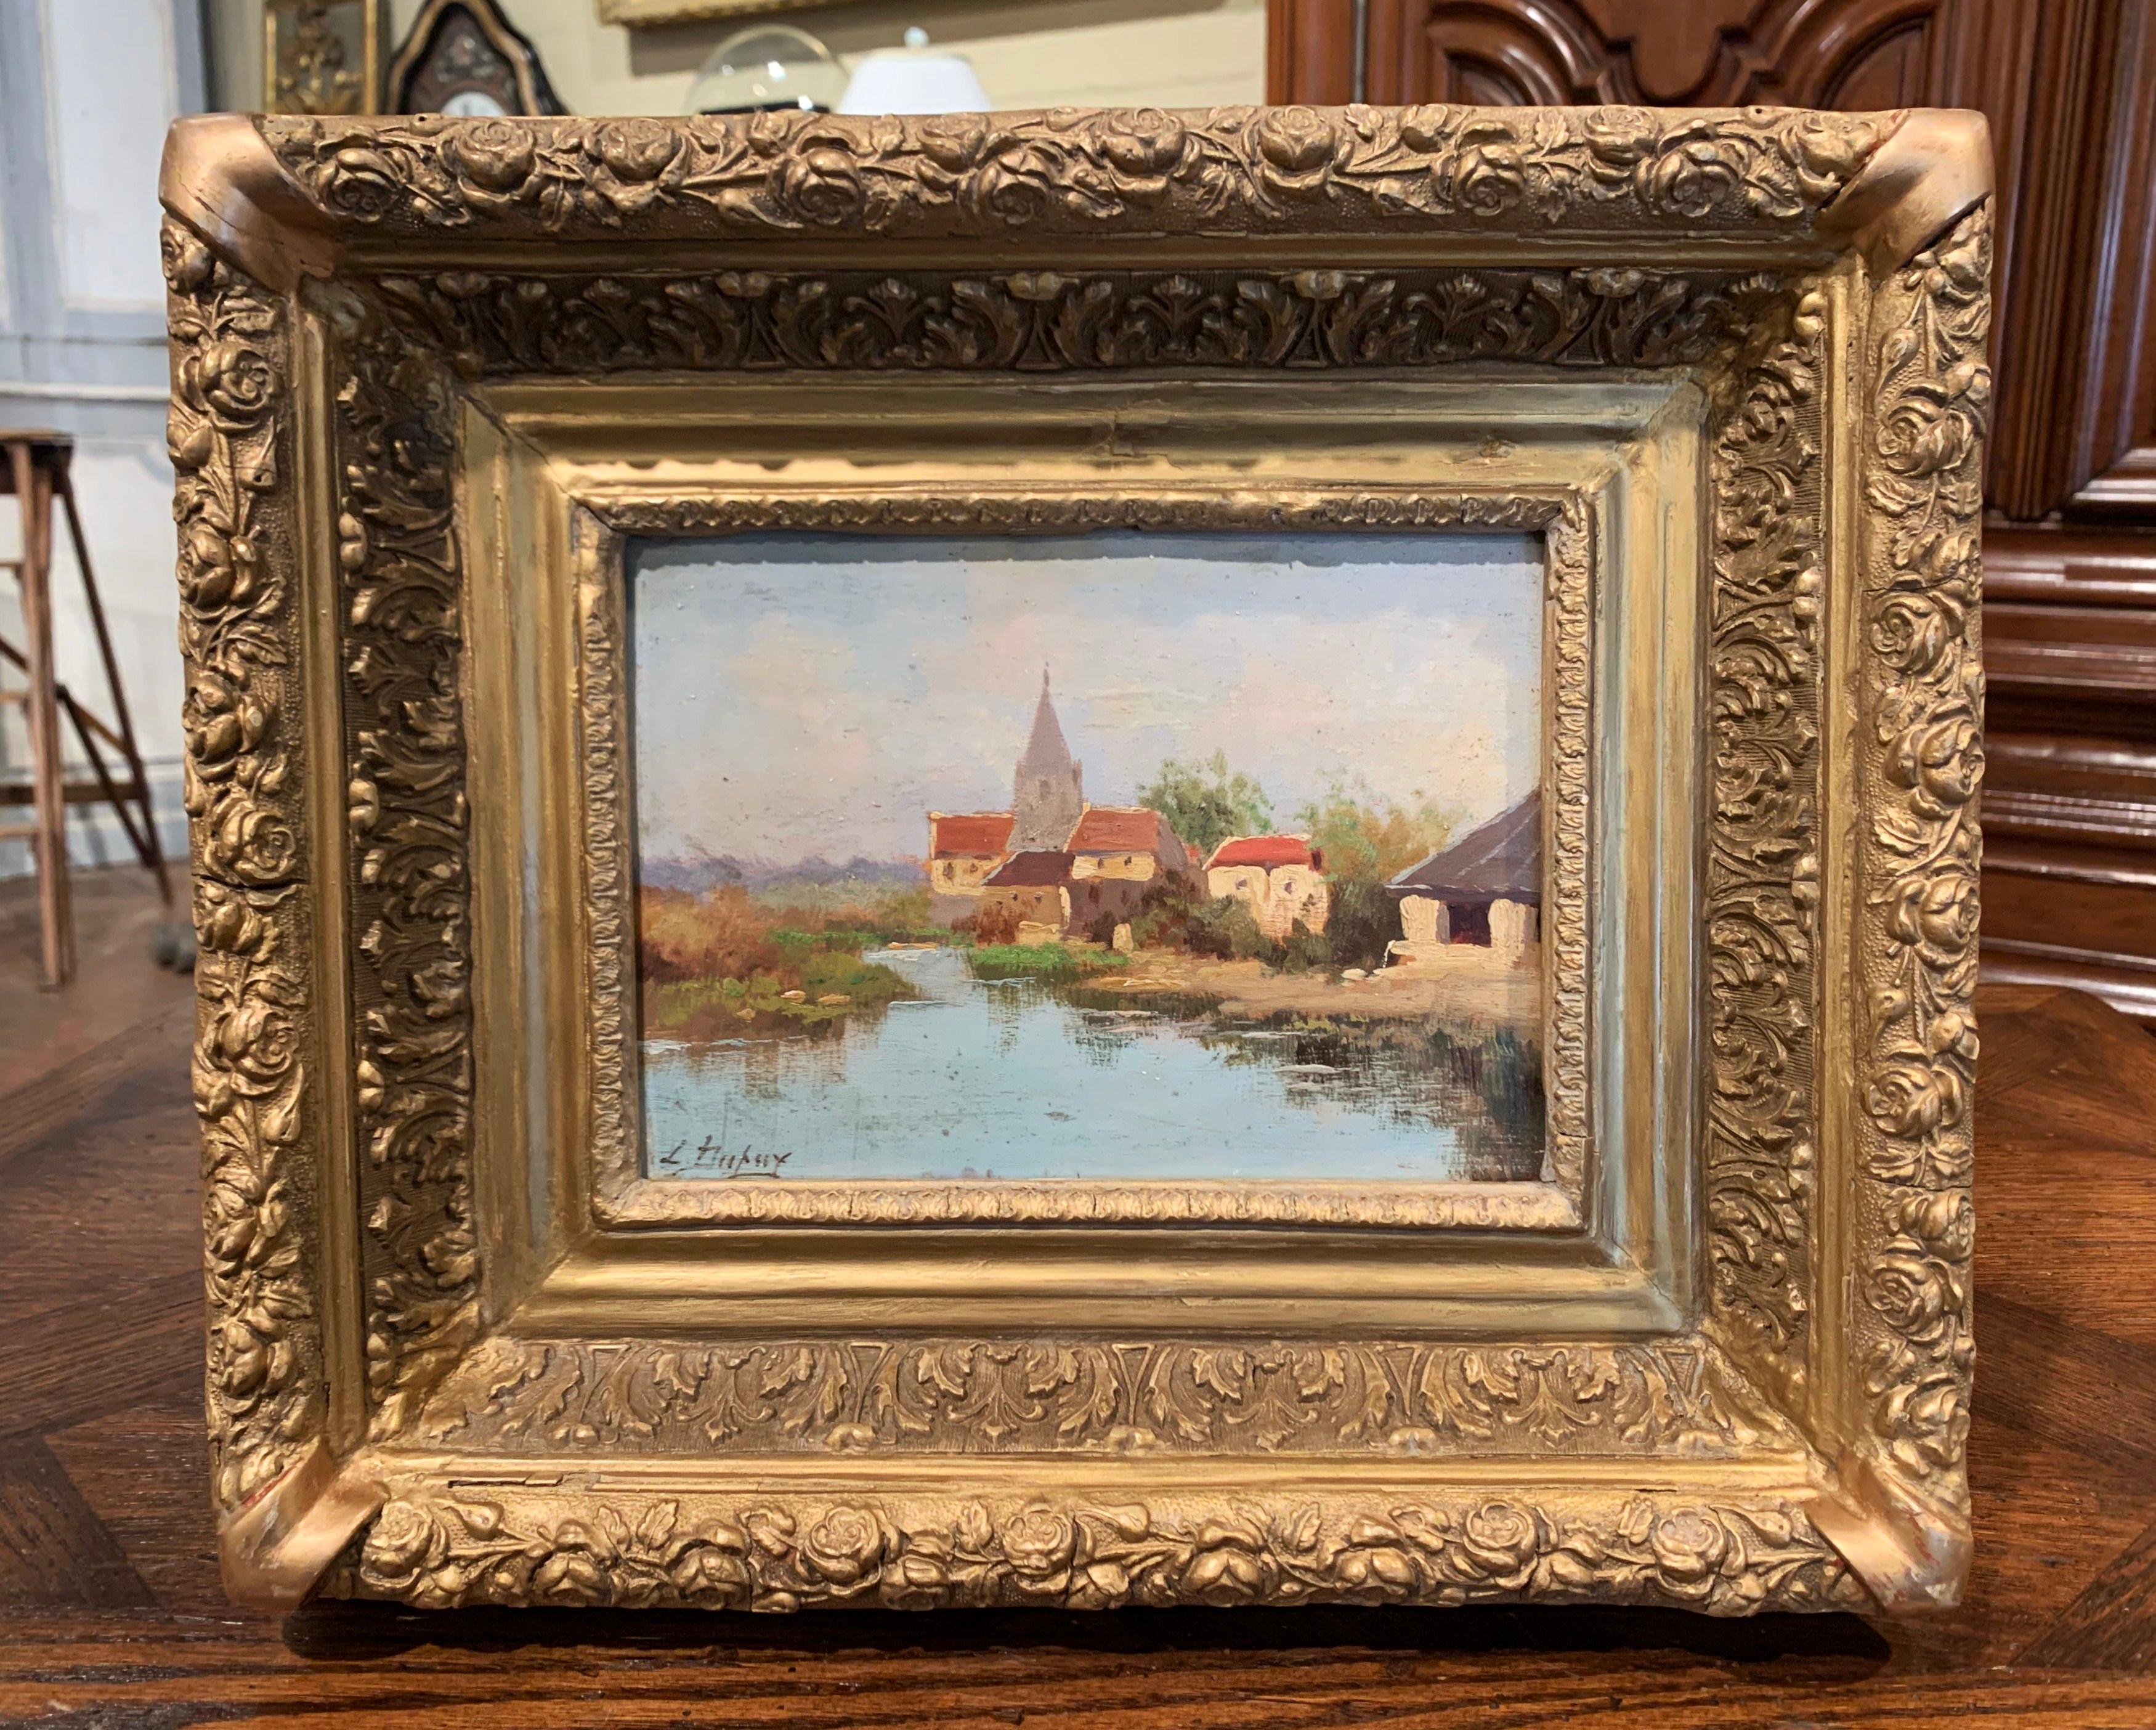 Wood 19th Century French Oil on Board Painting in Gilt Frame by E. Galien-Laloue